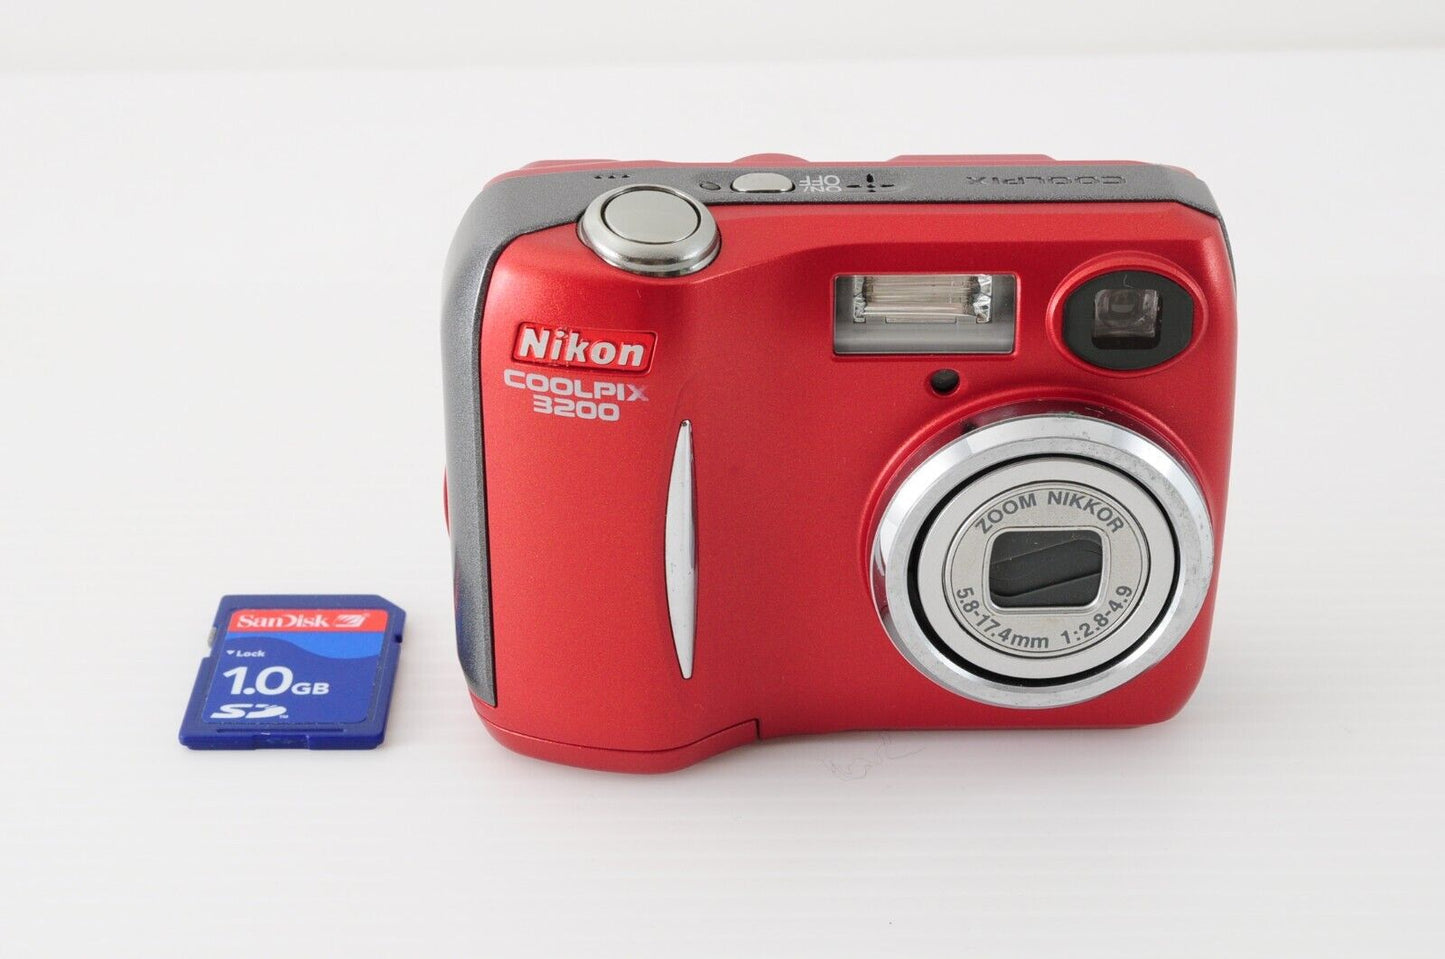 NIKON COOLPIX 3200 Red Point & Shoot Digital Camera from Japan #6765